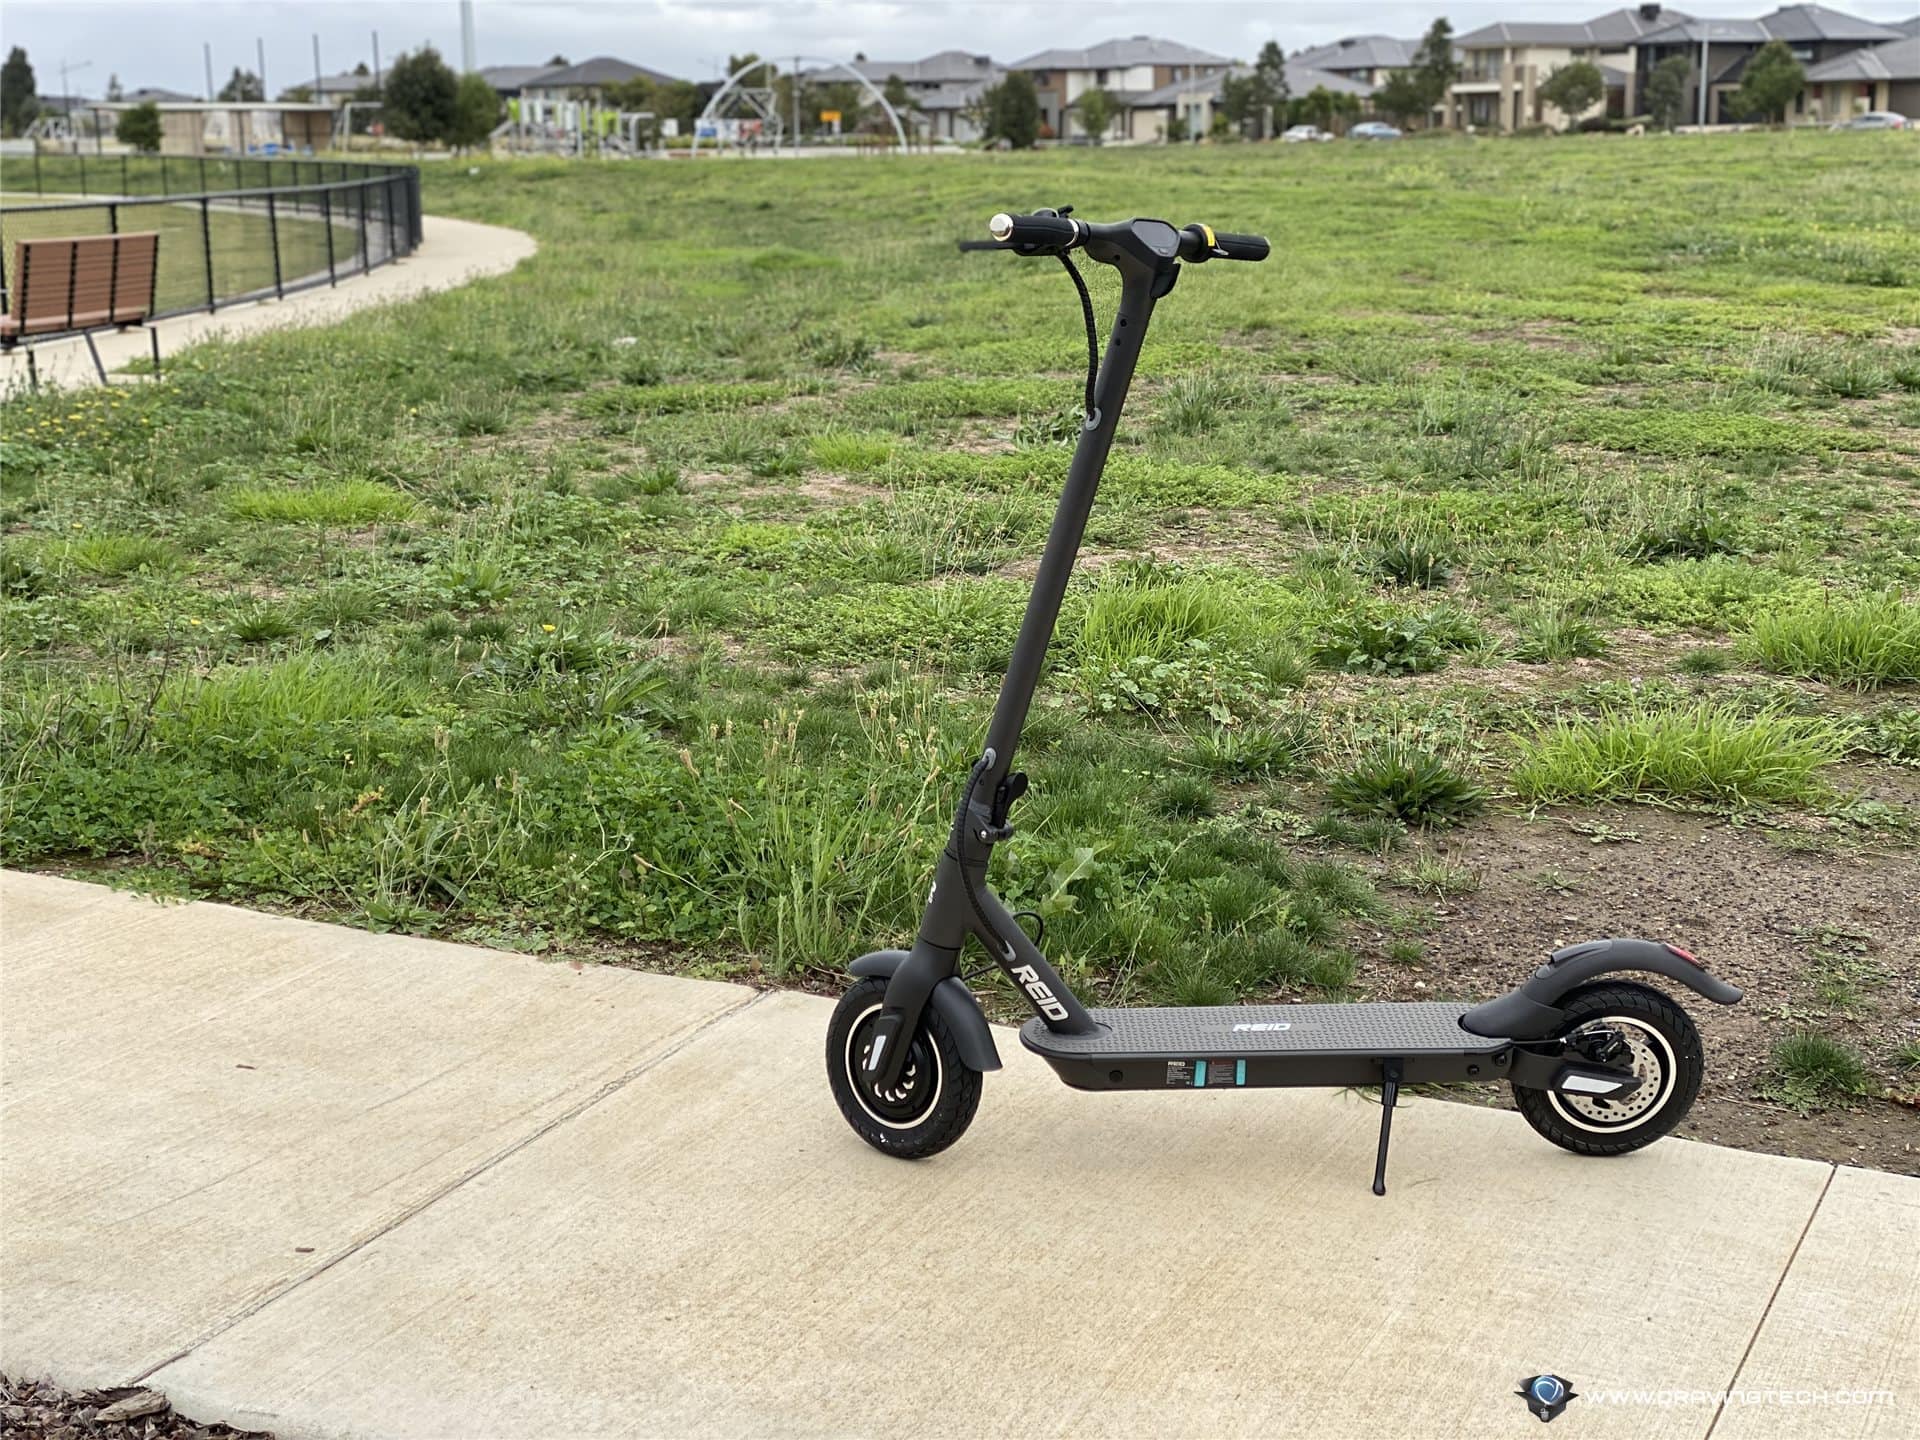 Riding my first electric scooter - Reid E4 Plus eScooter Review